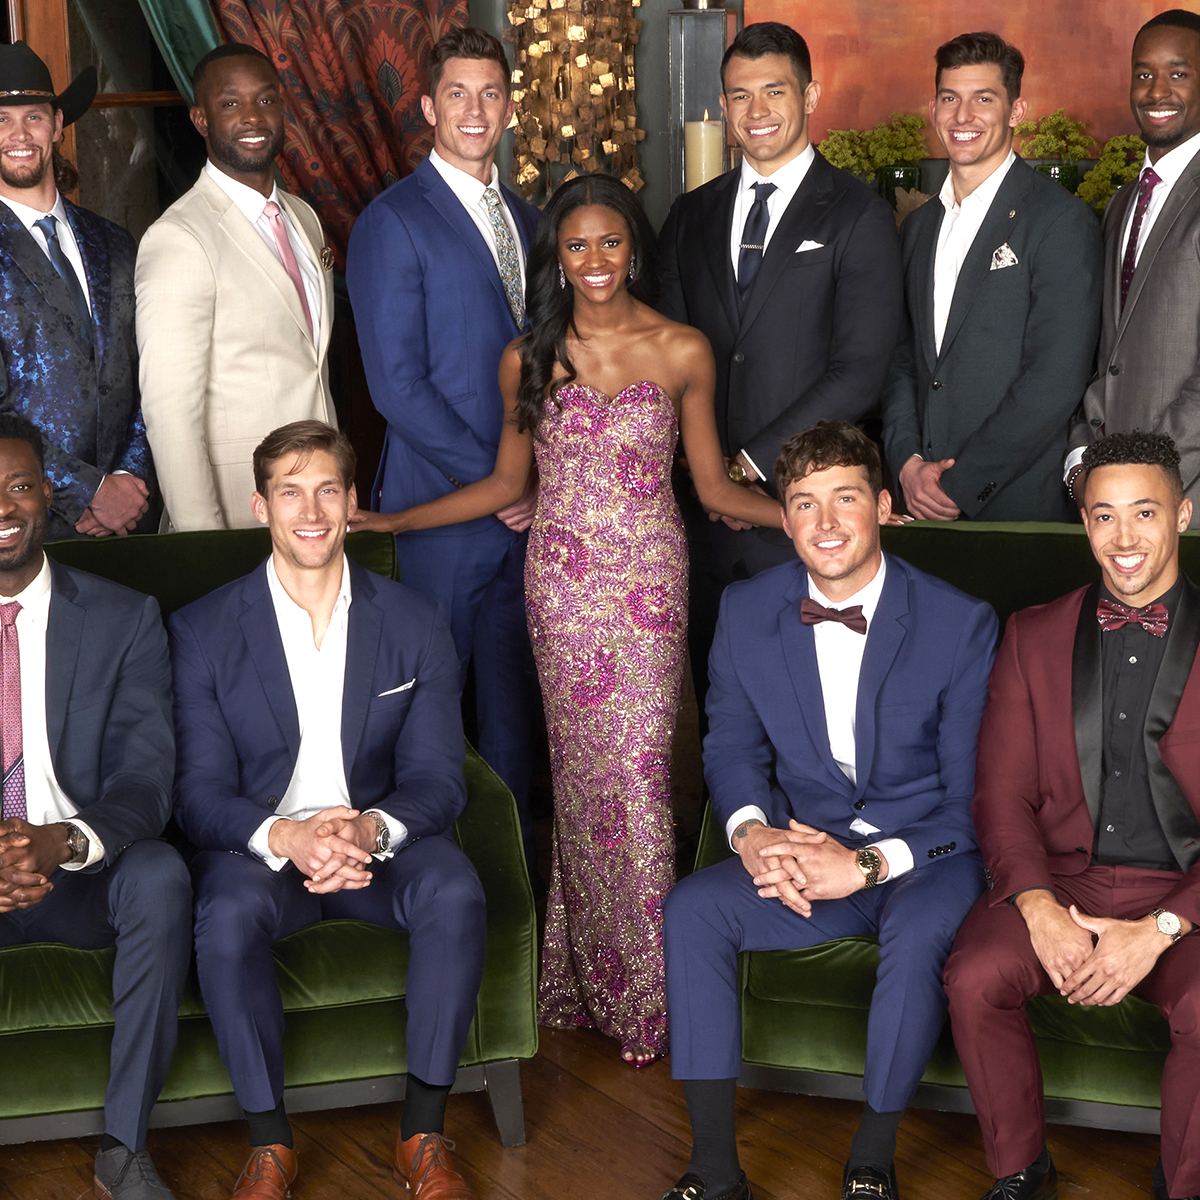 Why Charity Chose That Contestant on The Bachelorette - WireFan - Your ...